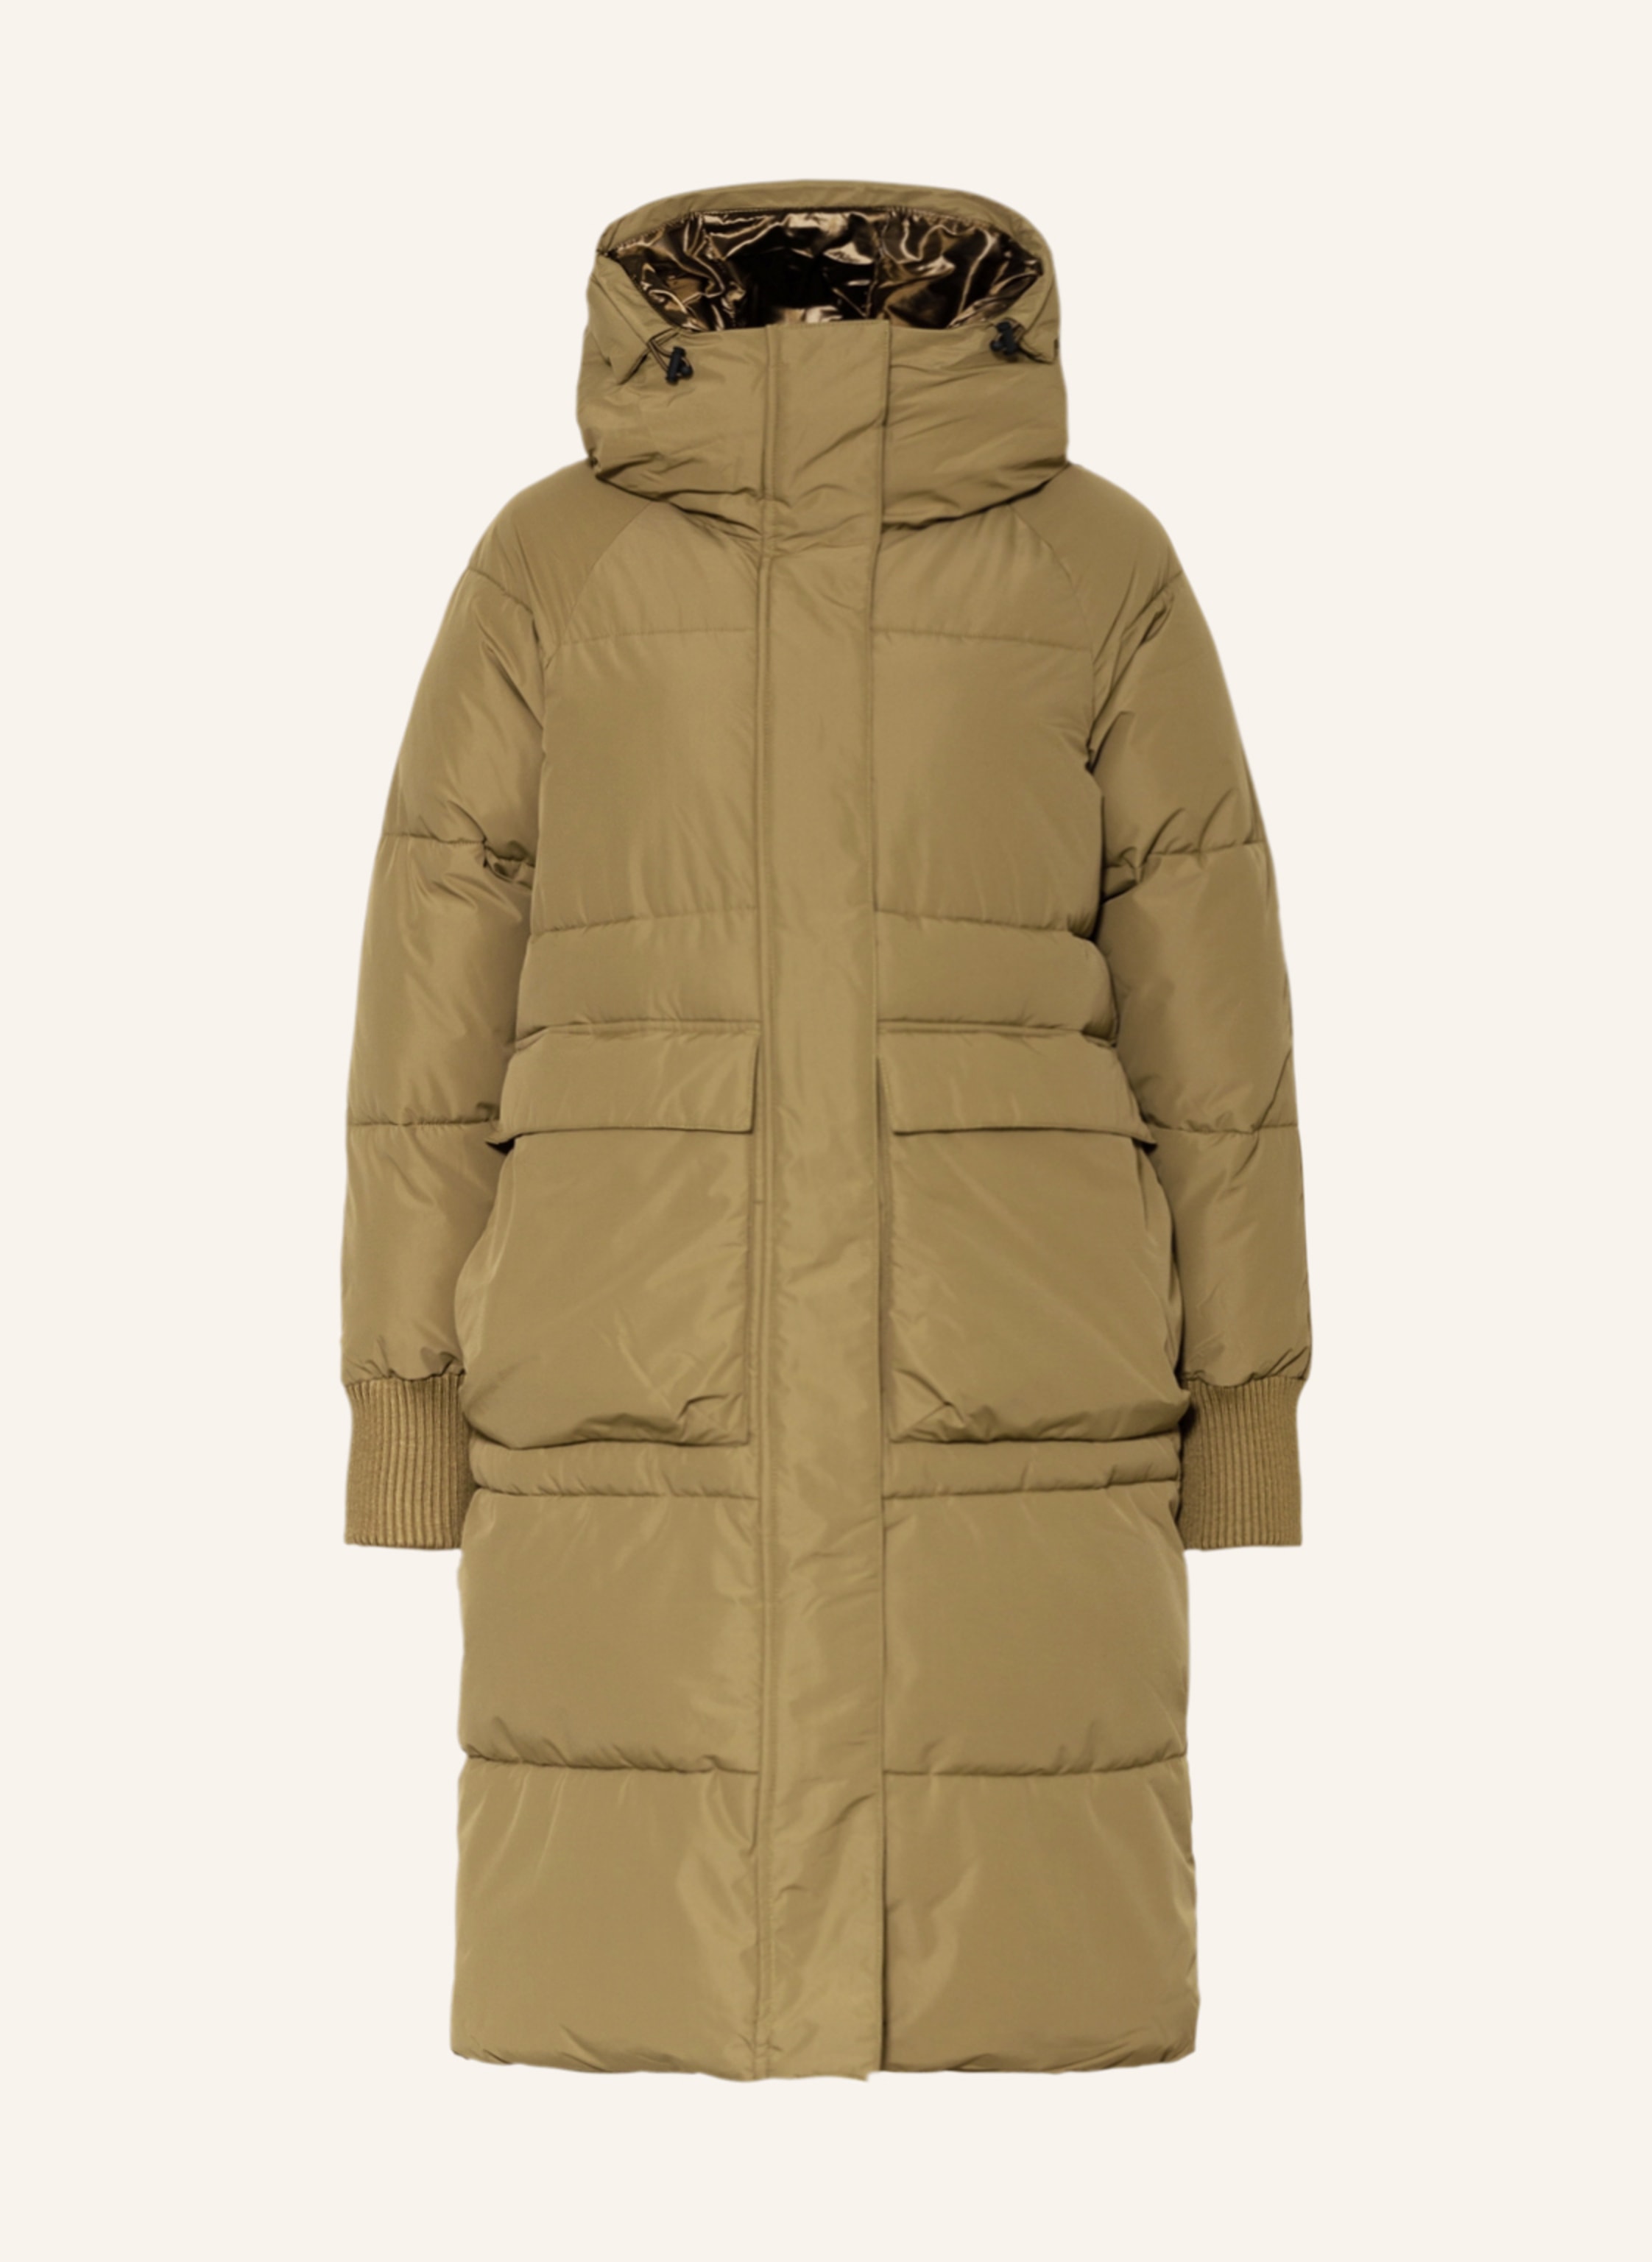 EMBASSY OF BRICKS AND LOGS Quilted coat RY in olive